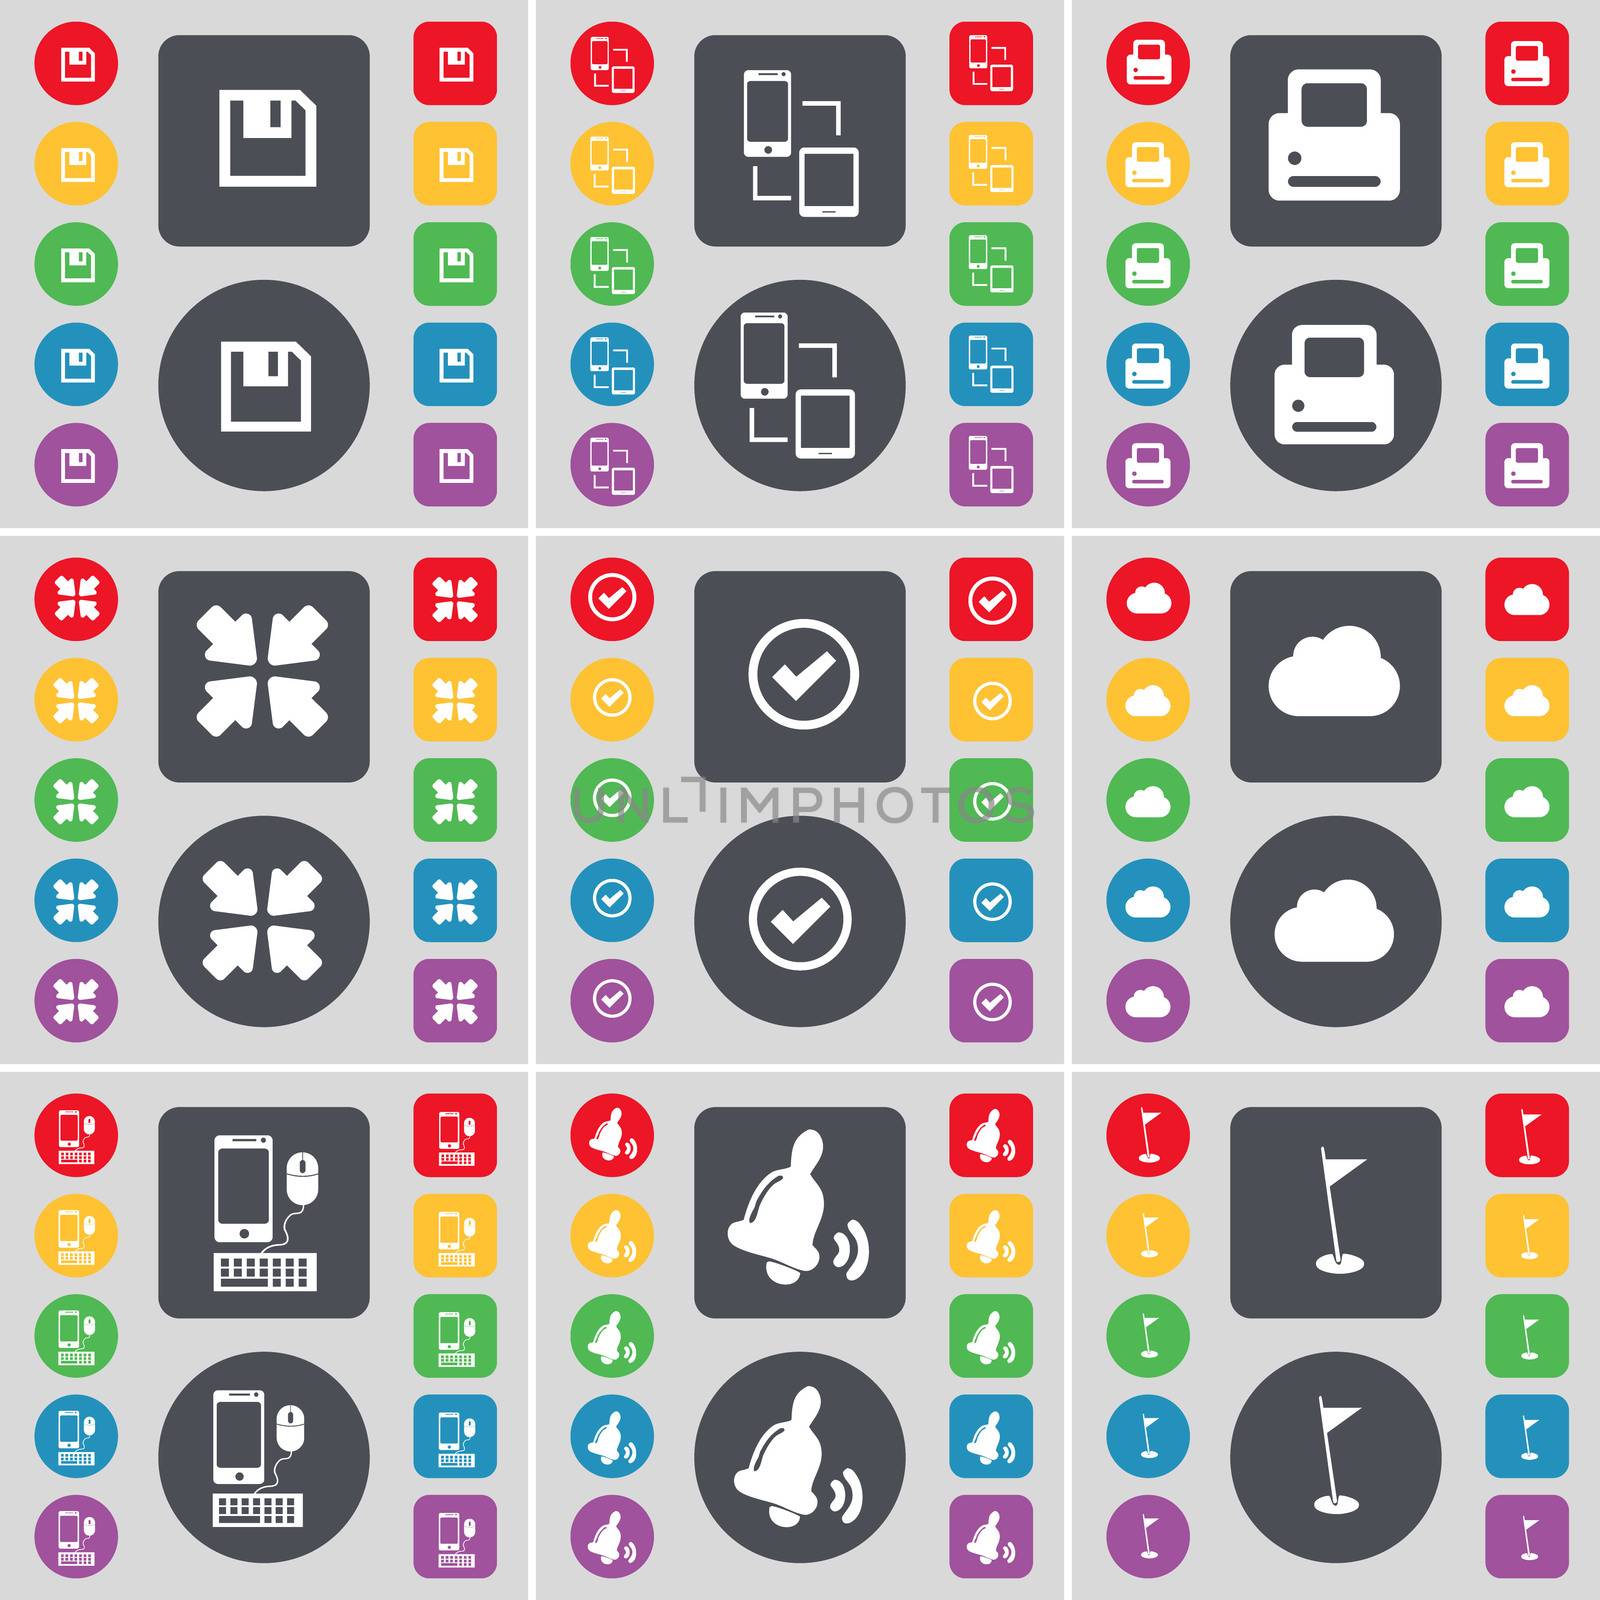 Floppy, Connection, Printer, Deploying screen, Tick, Cloud, Smartphone, Bell, Golf hole icon symbol. A large set of flat, colored buttons for your design. illustration